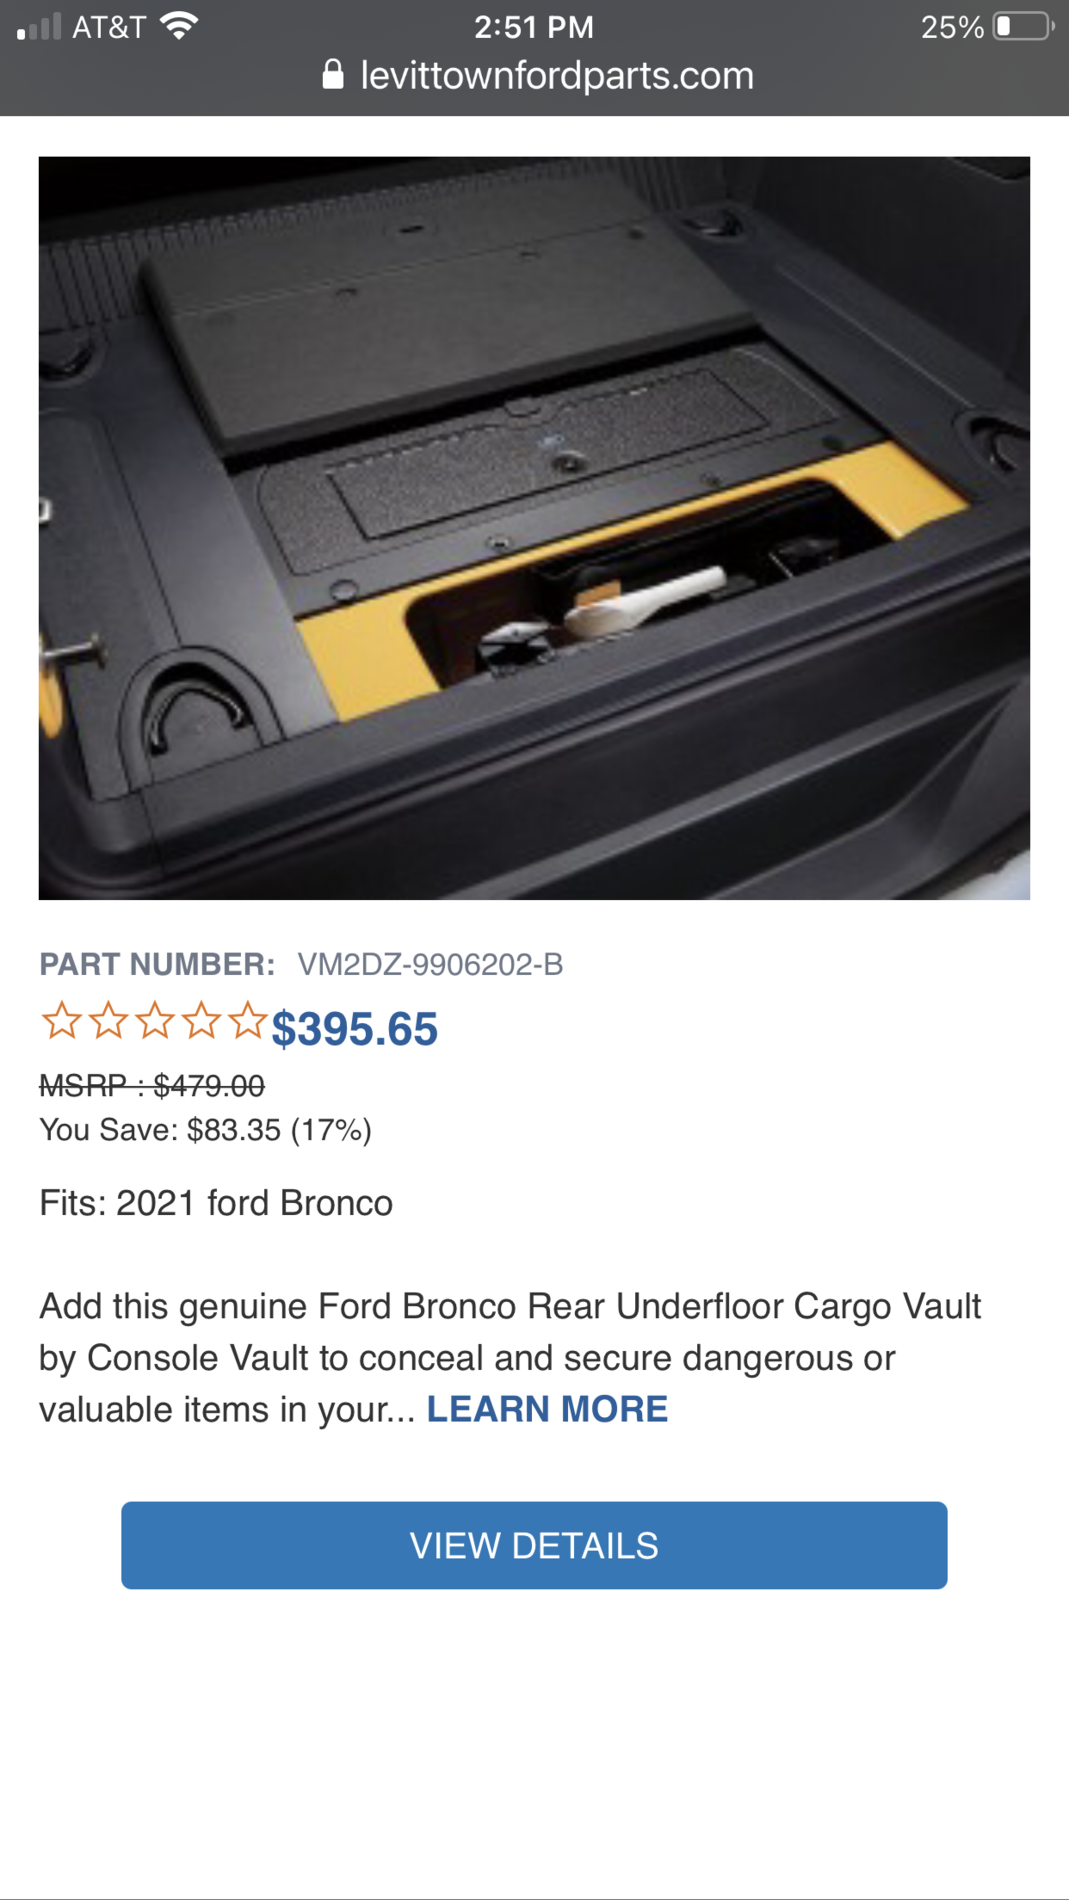 Ford Bronco Cargo Safe (Locking Storage) by Console Vault - installation and review on 2021 Bronco CBAD78F5-CA12-4F9C-B7C5-7955868348D0